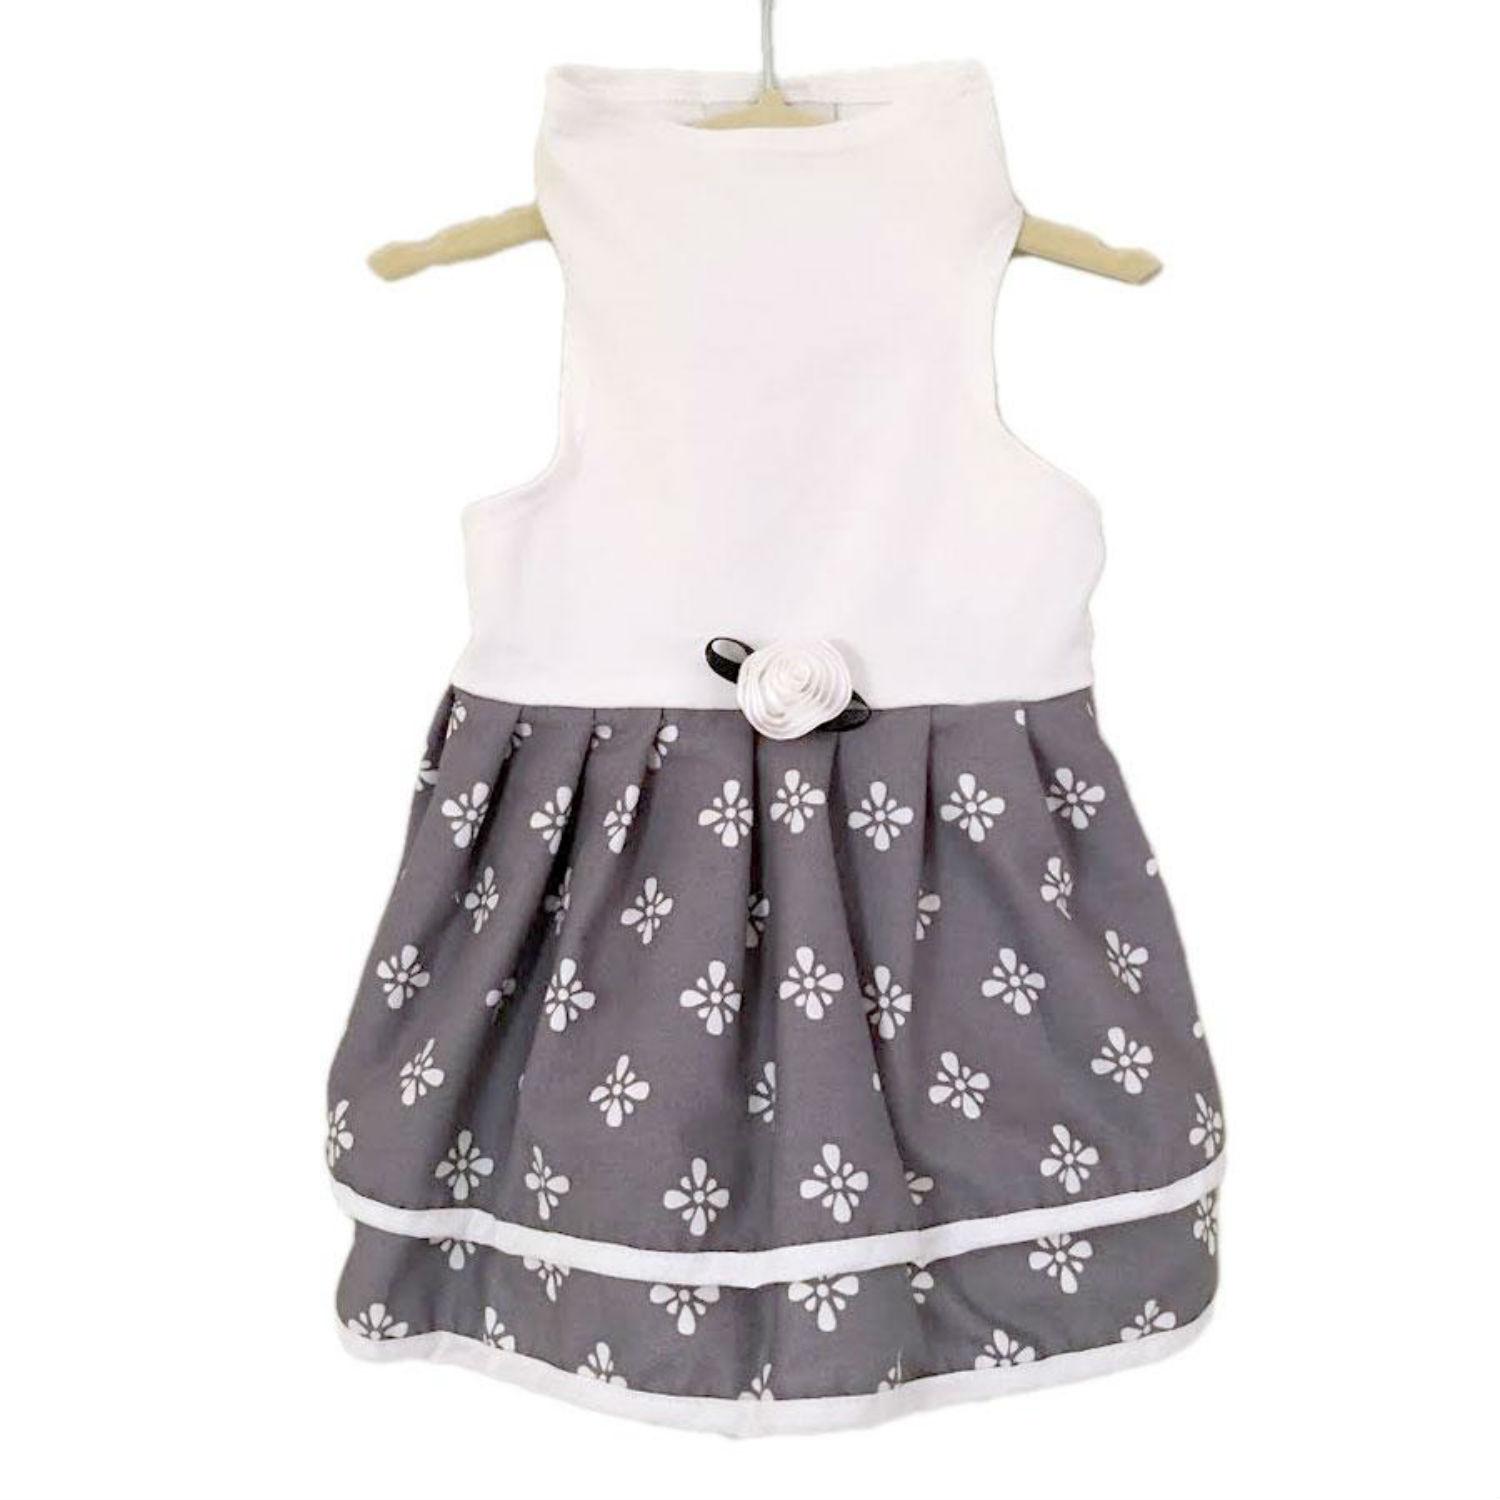 Daisy & Lucy Grey and White Print Dog Dress